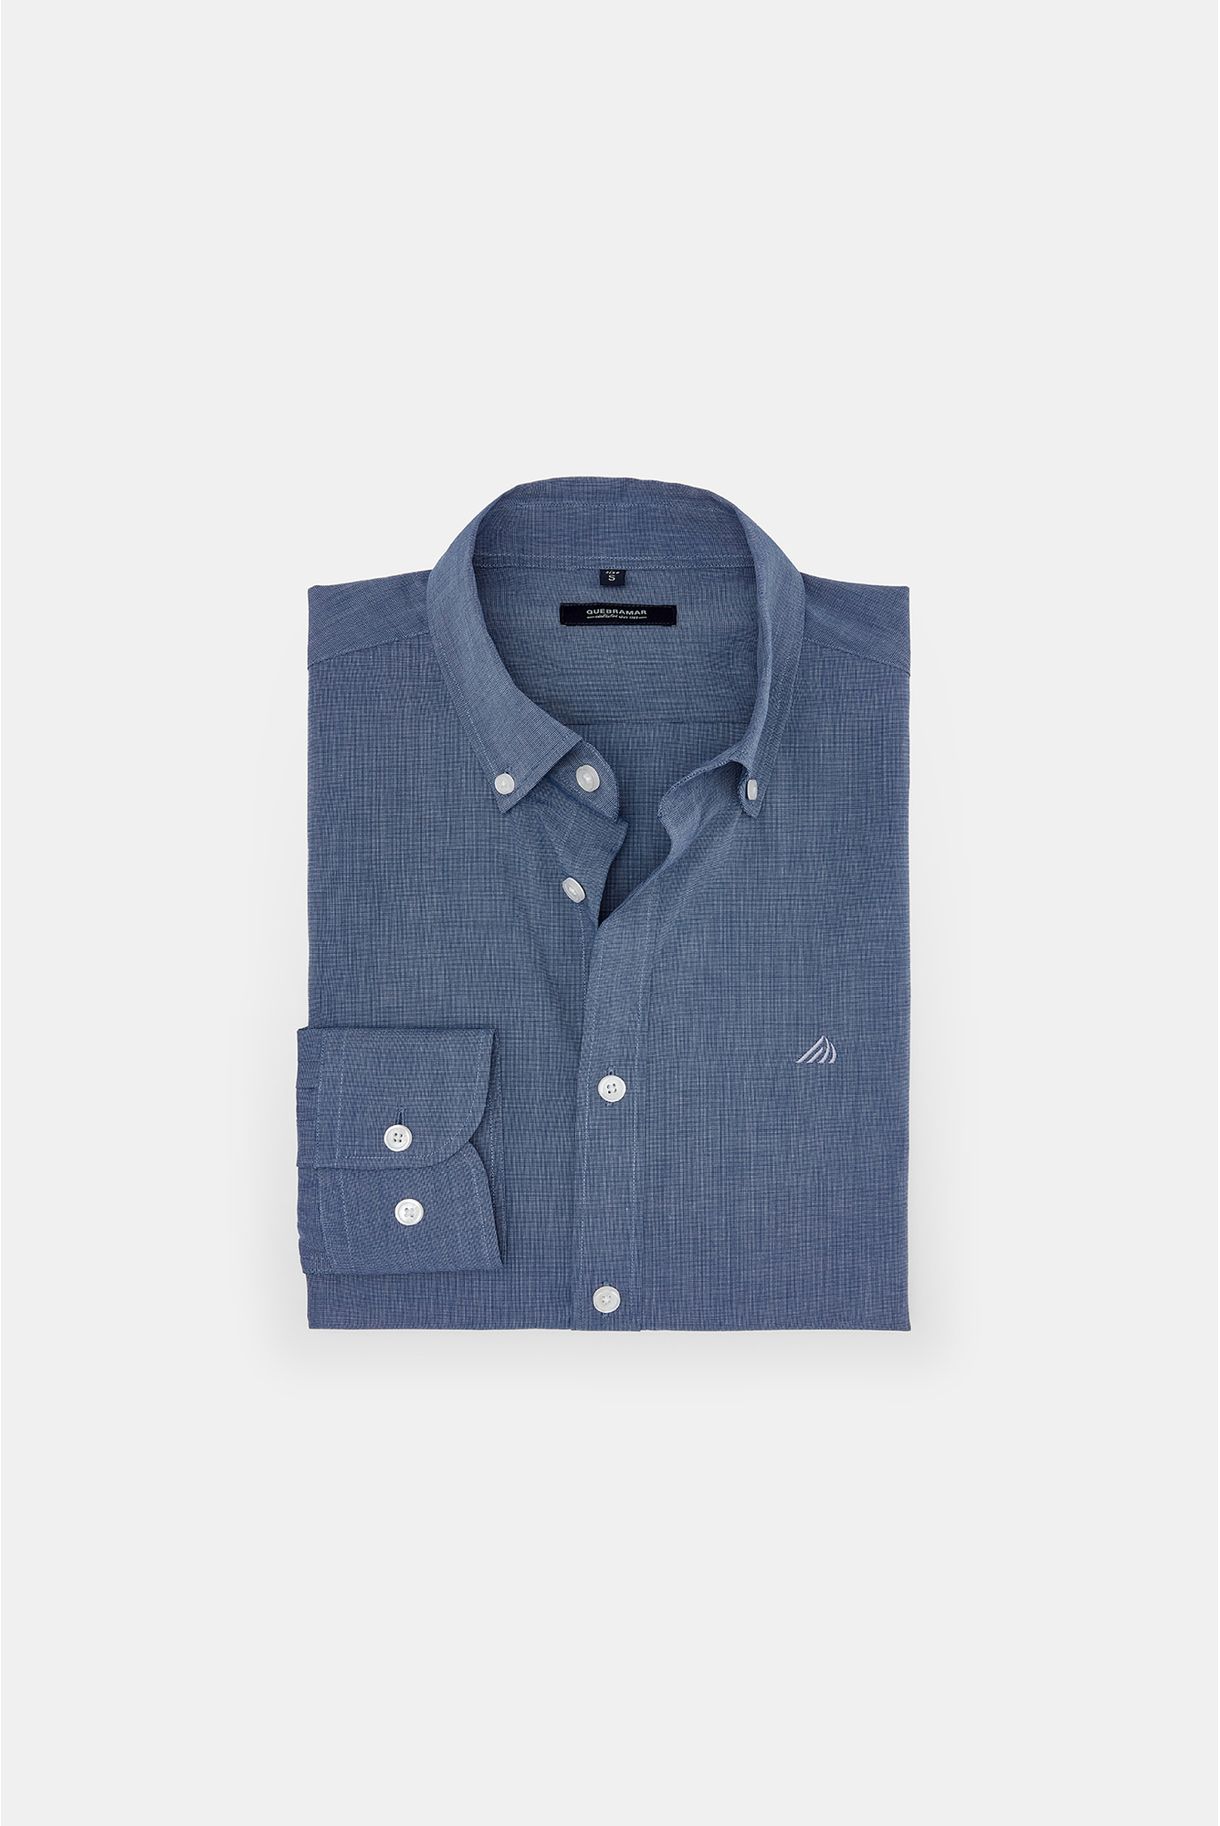 shirt with structure